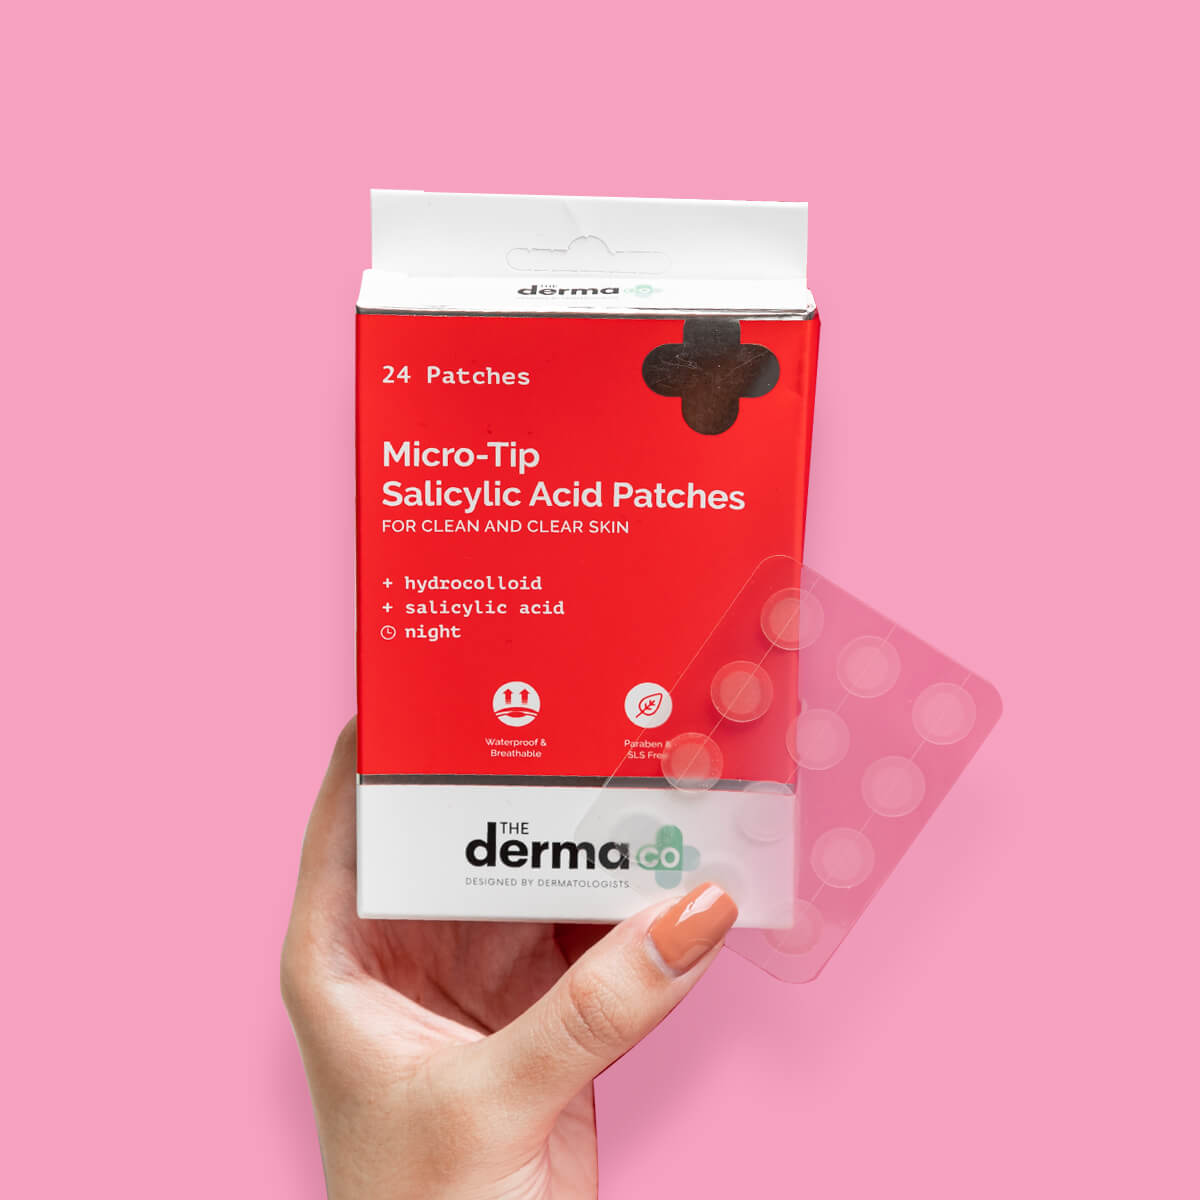 Derma co Micro Tip Salicylic Acid Patches